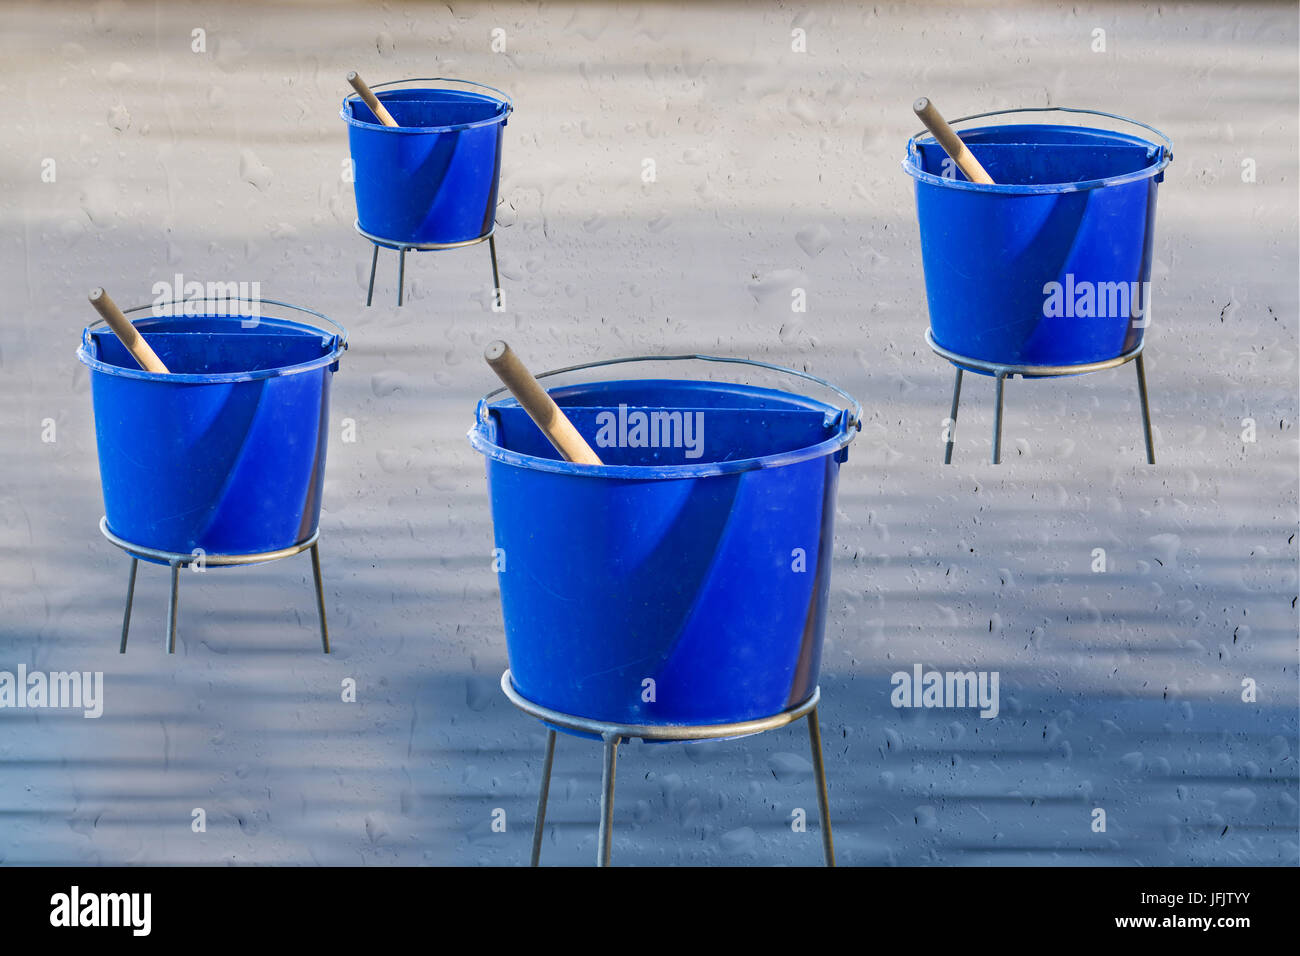 Download Plastic Buckets High Resolution Stock Photography And Images Alamy Yellowimages Mockups